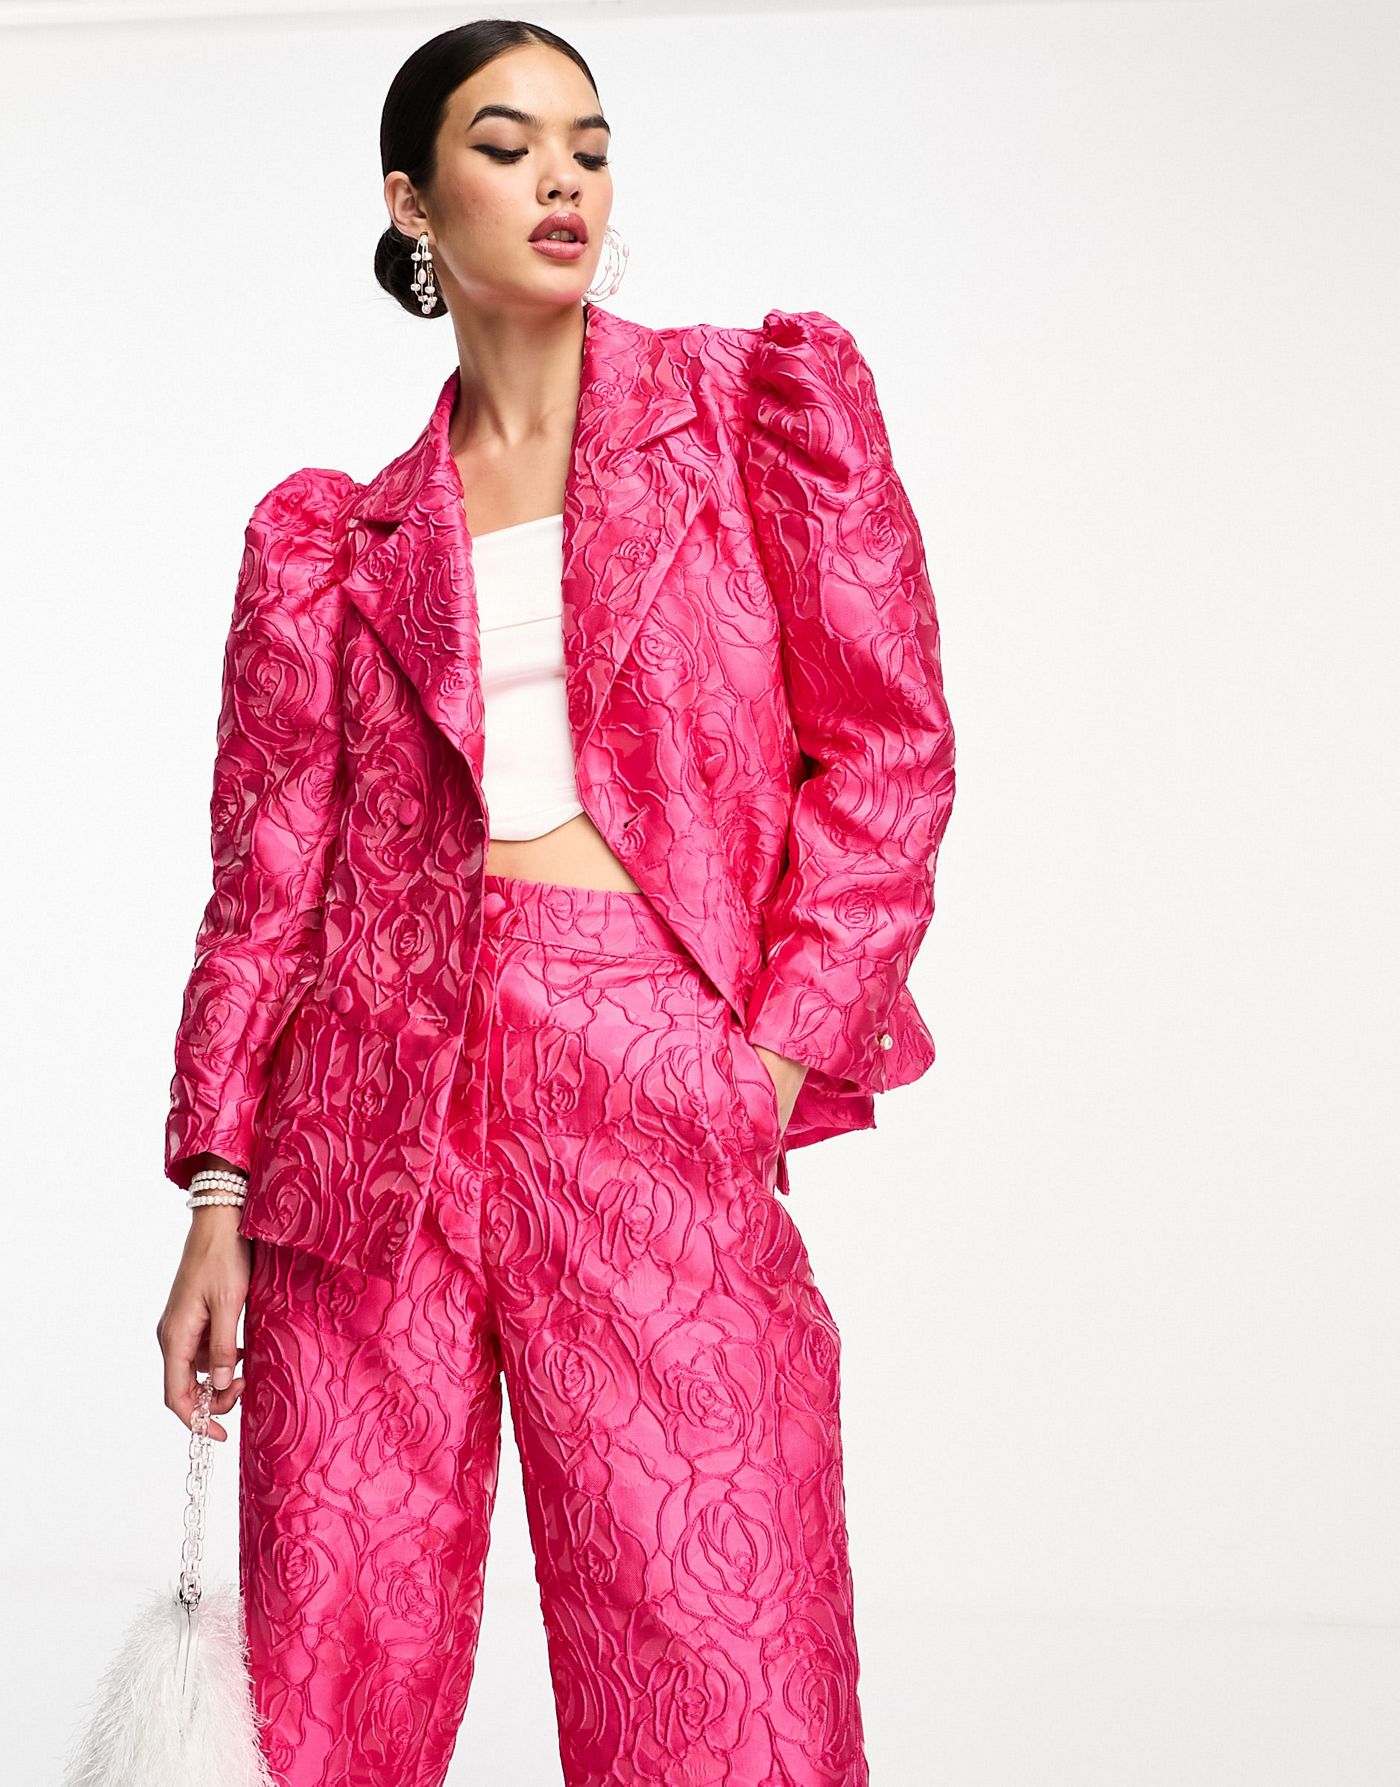 Sister Jane jacquard blazer suit co-ord in pink